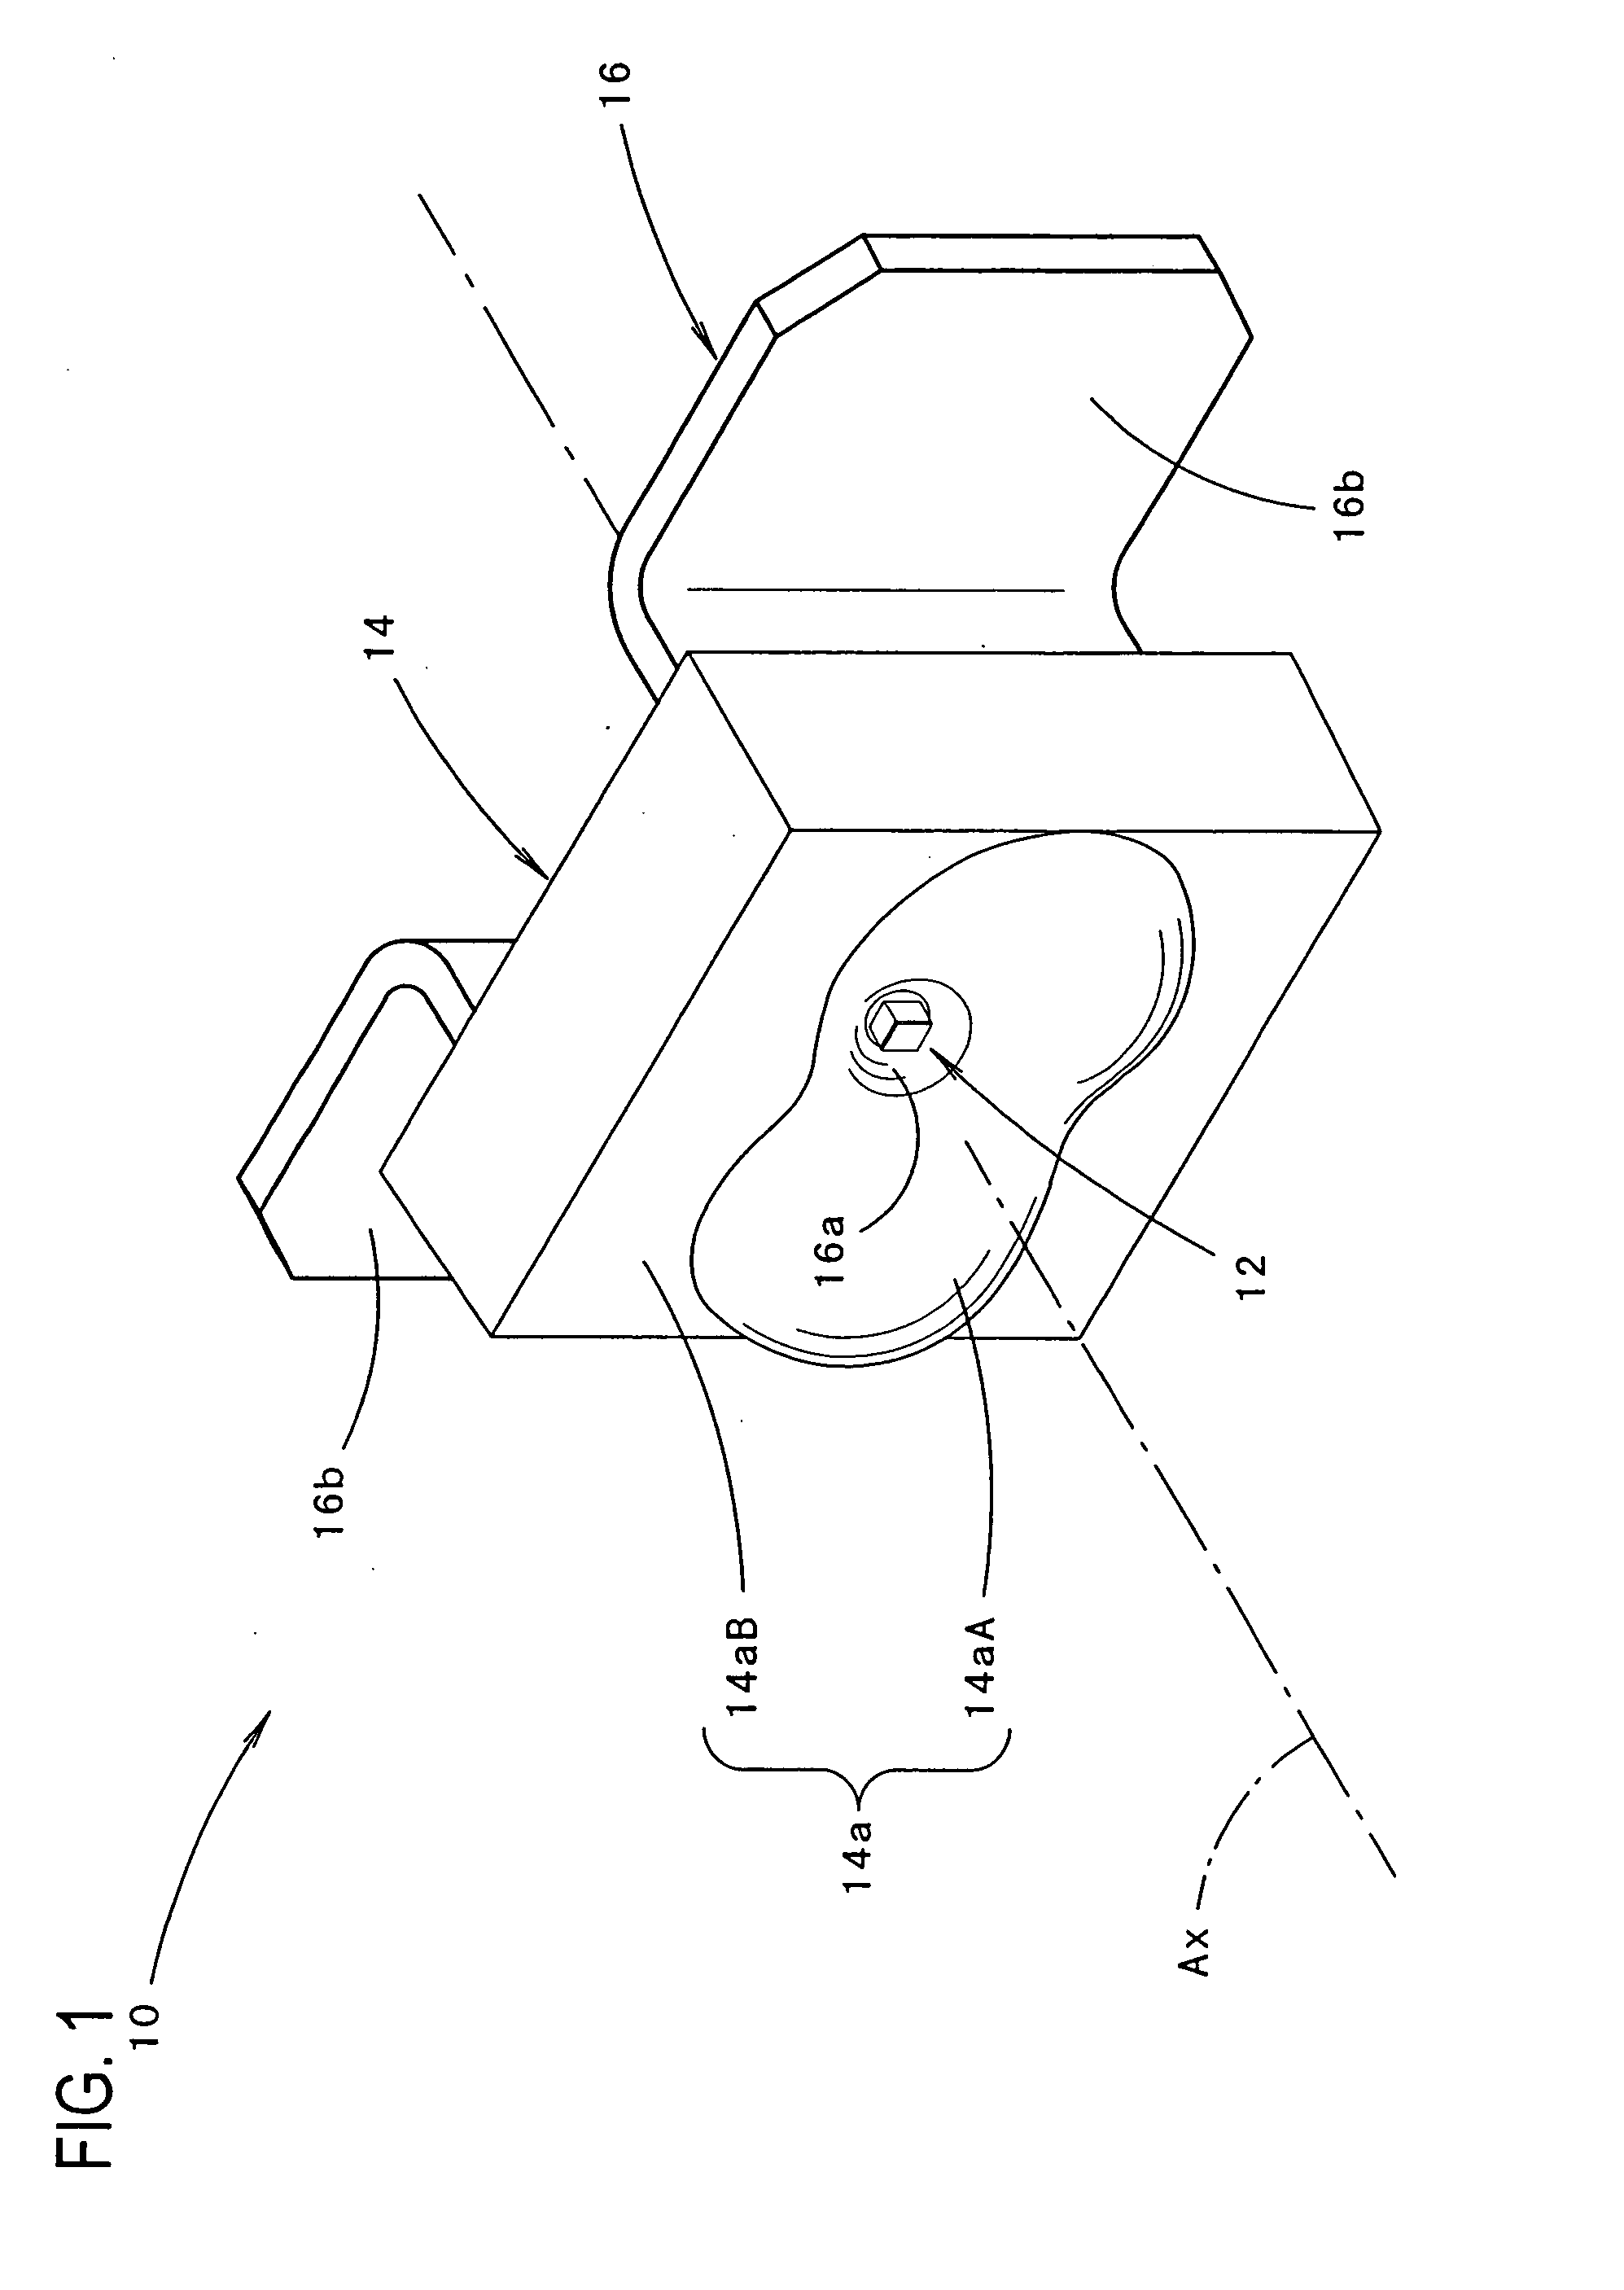 Light-emitting diode and vehicular lamp